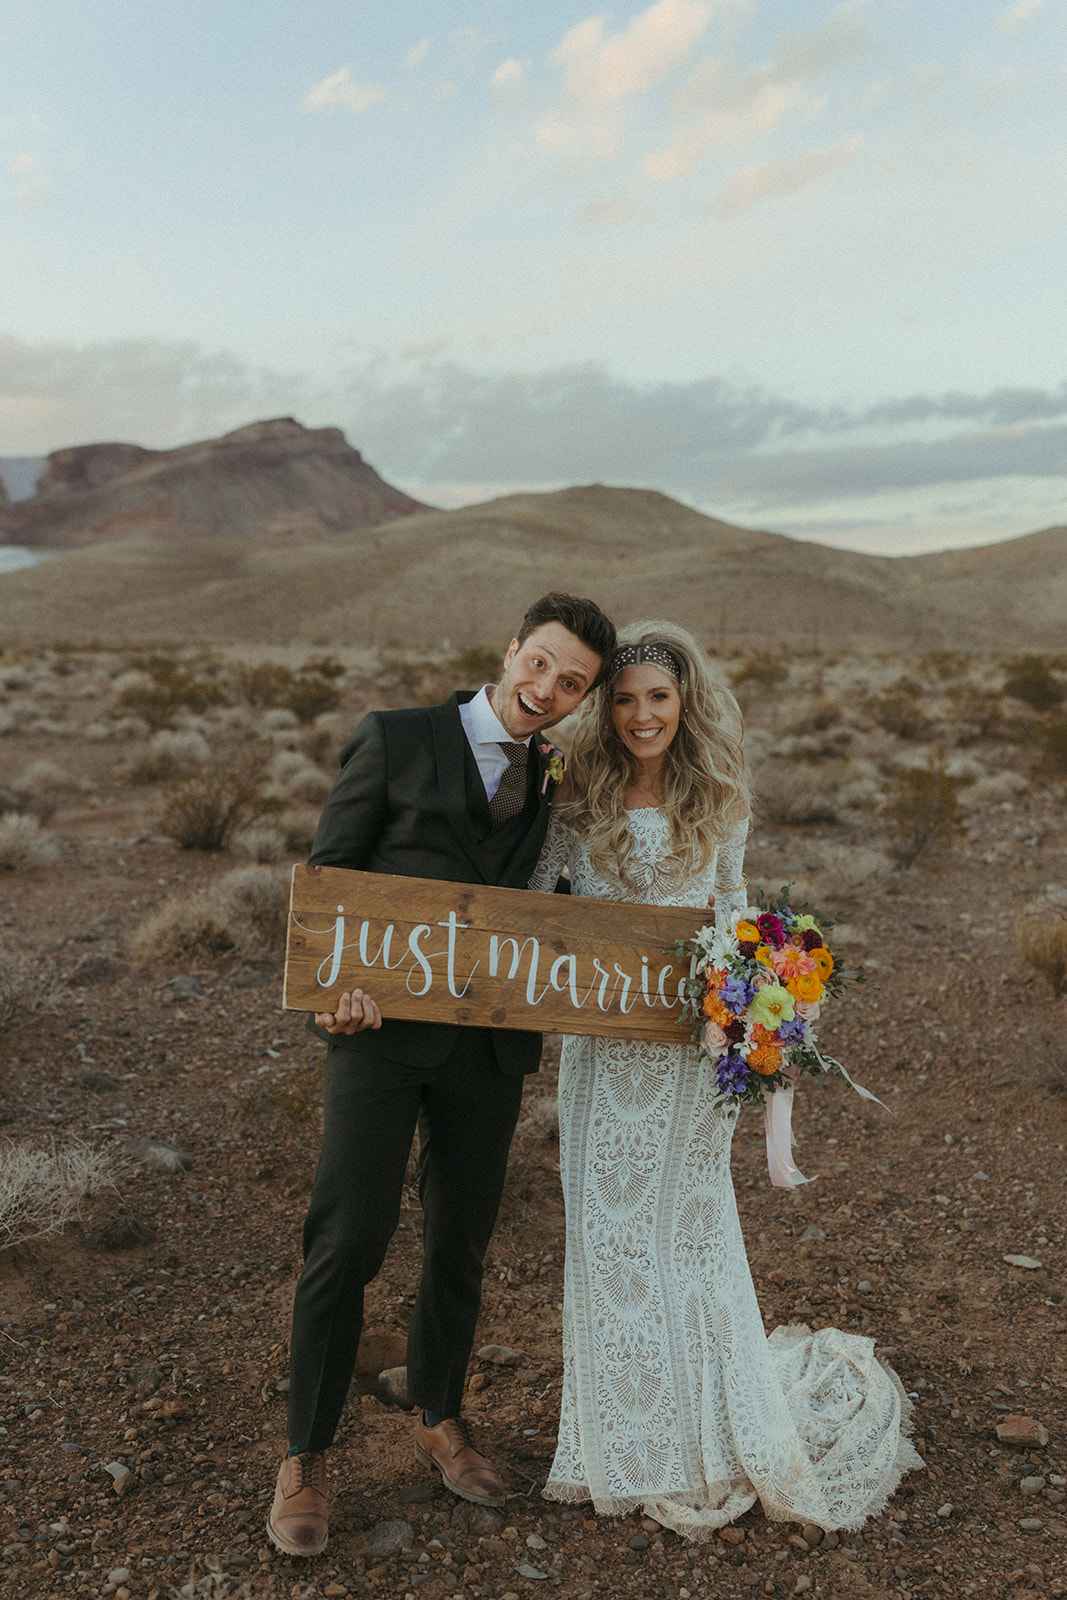 Newlyweds hold a custom wooden just married sign